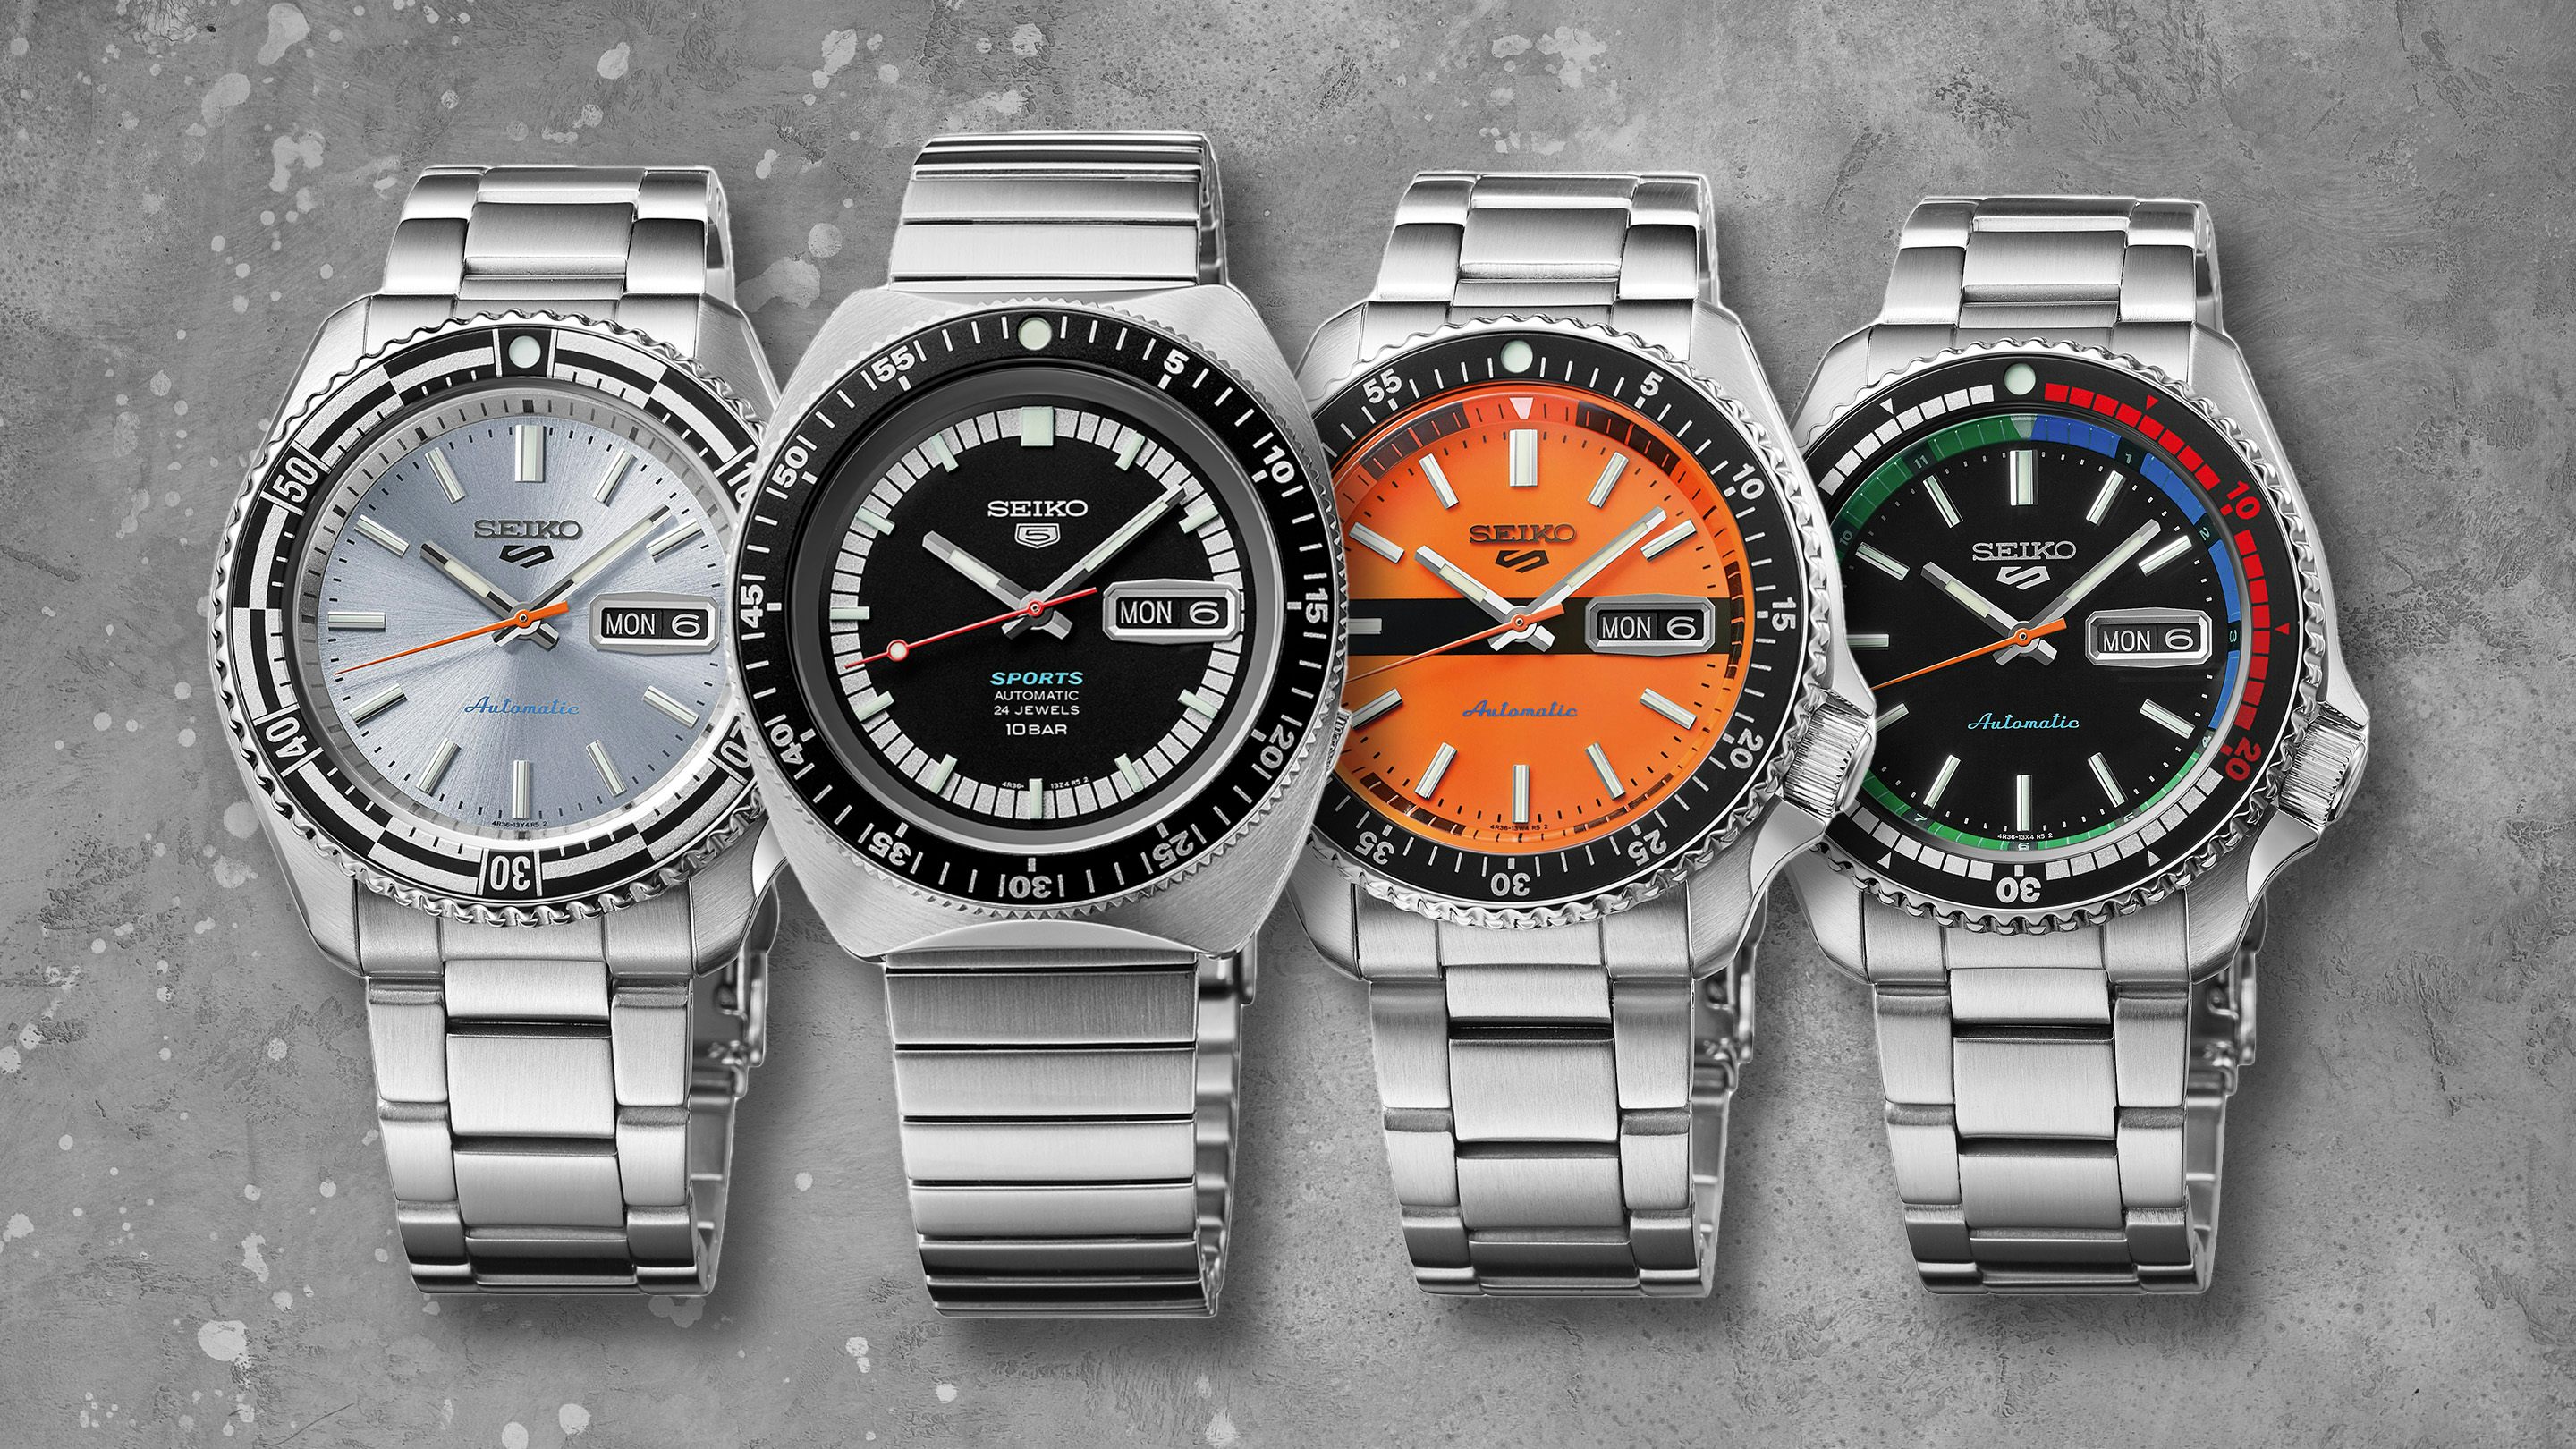 Introducing The New Seiko 5 Sports 55th Anniversary Editions